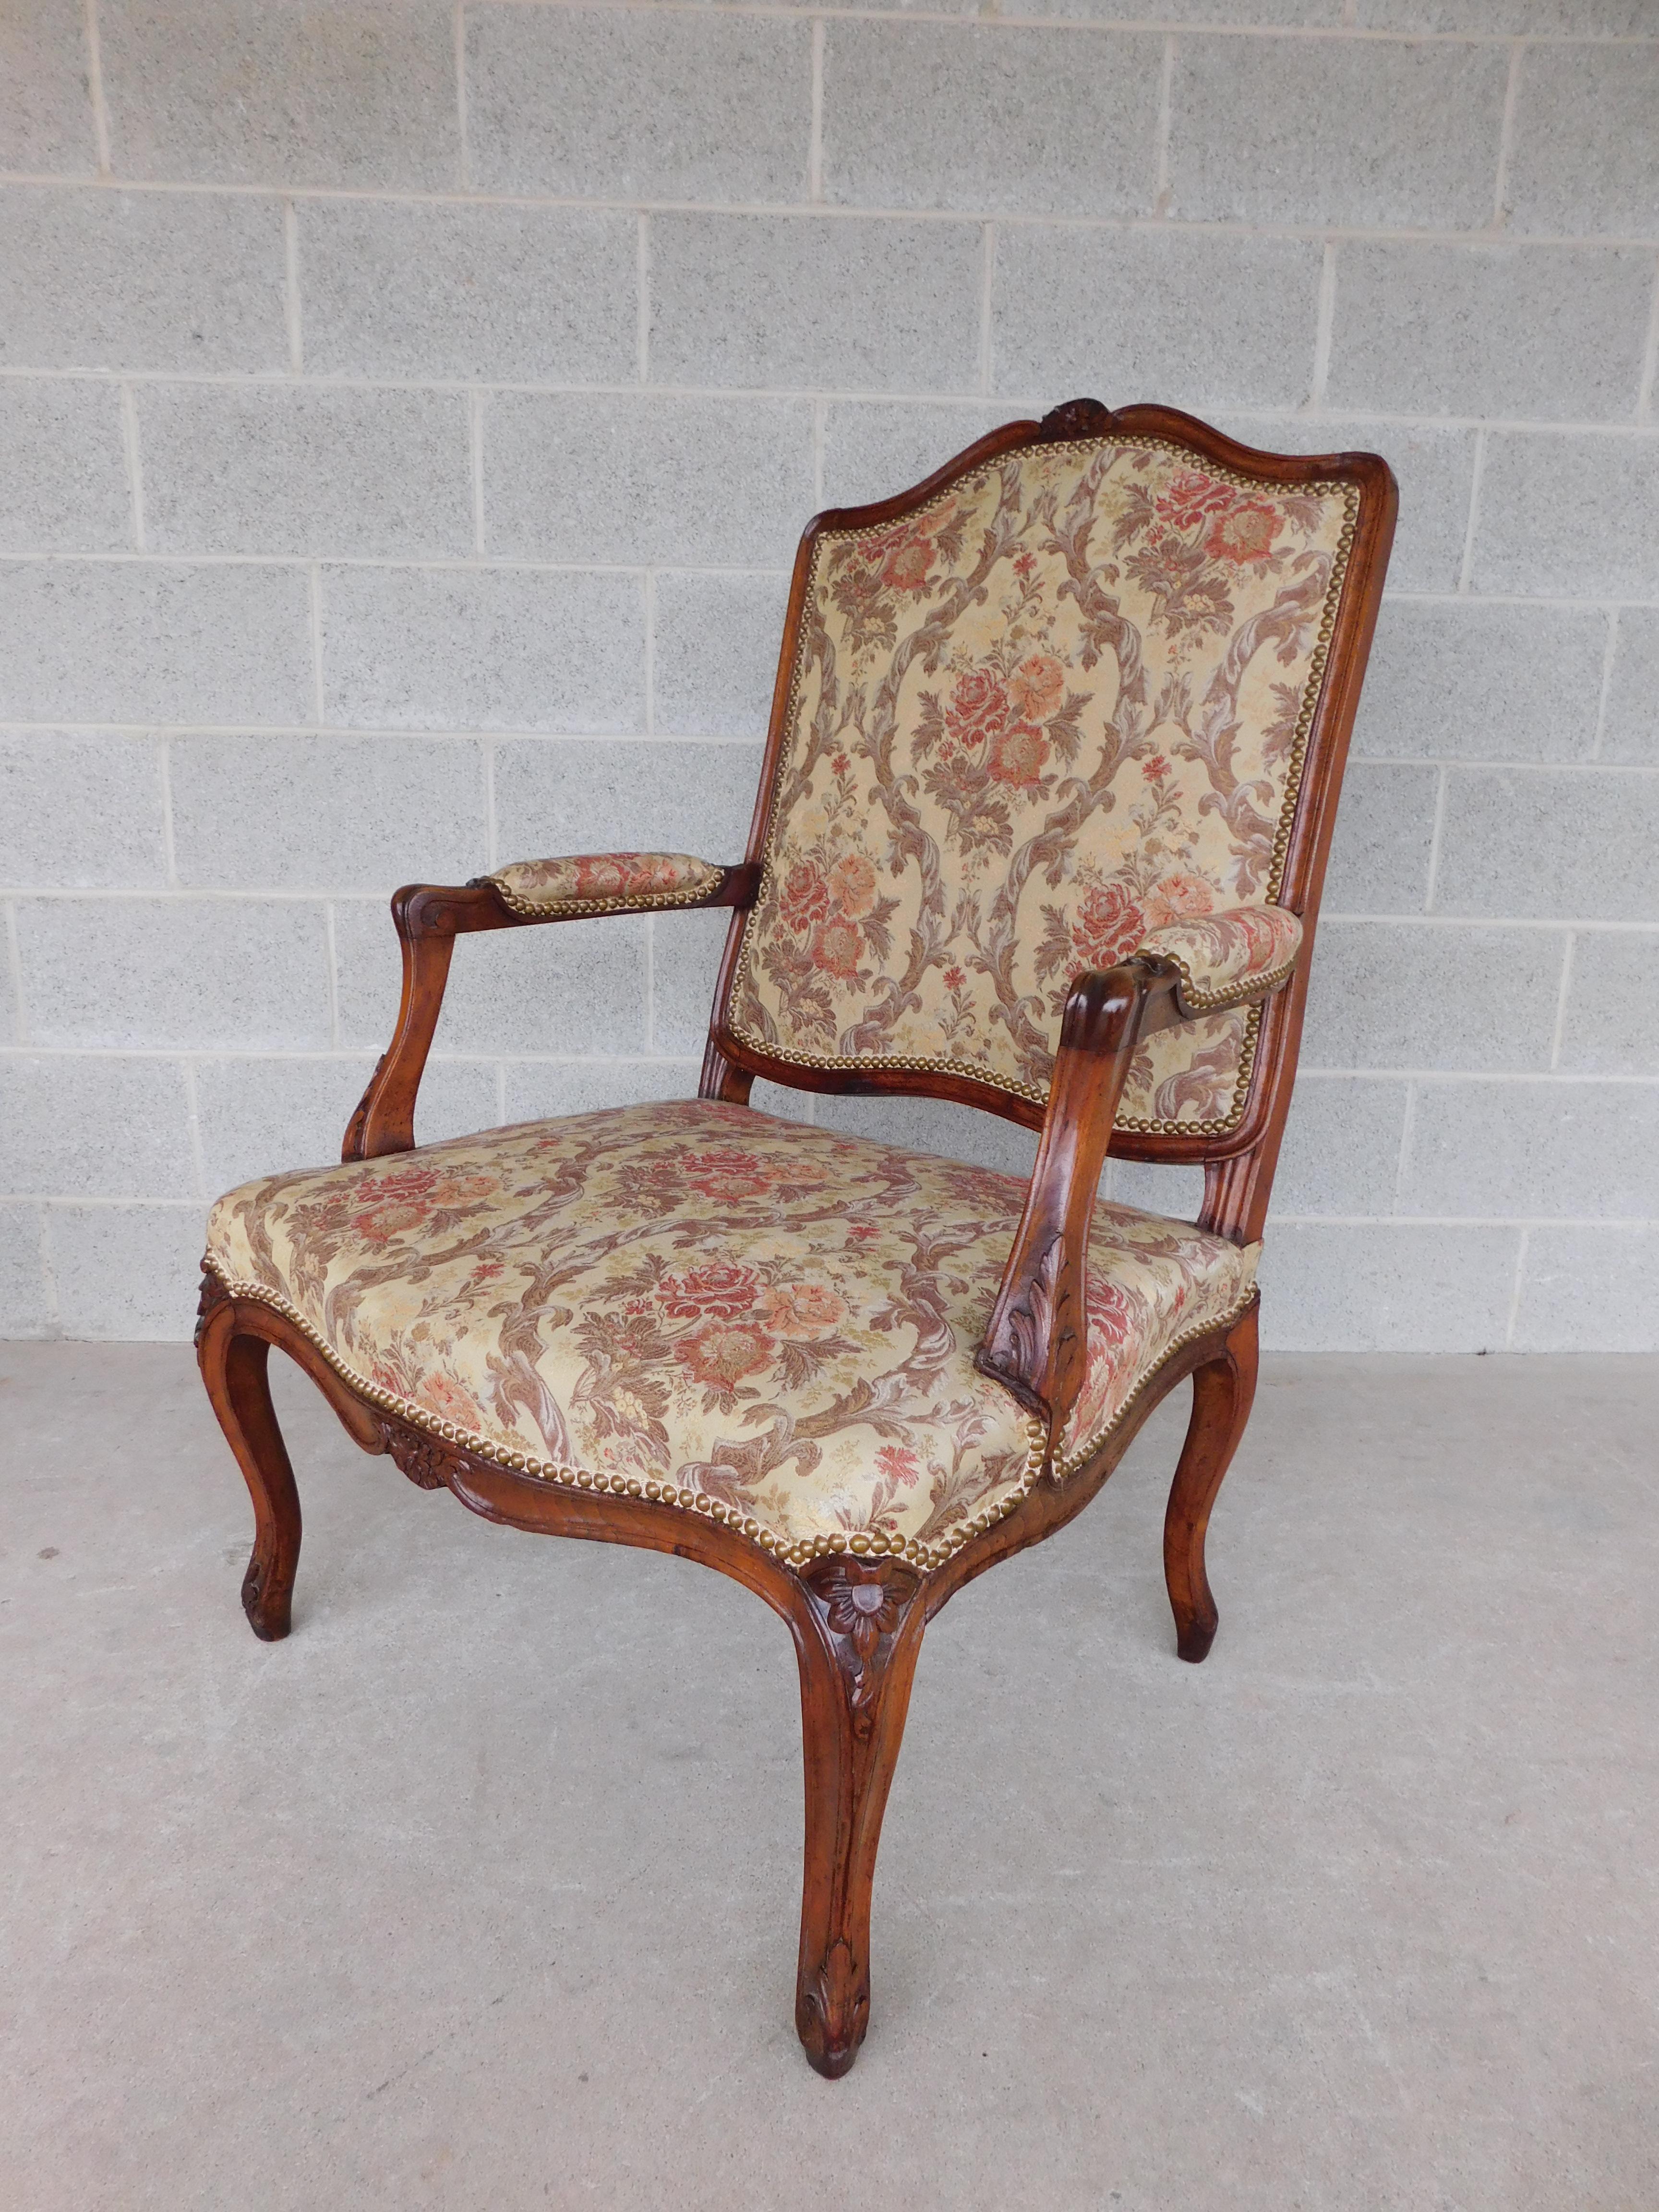 North American Vintage French Louis XV Style Fauteuil Chairs  - a Pair For Sale